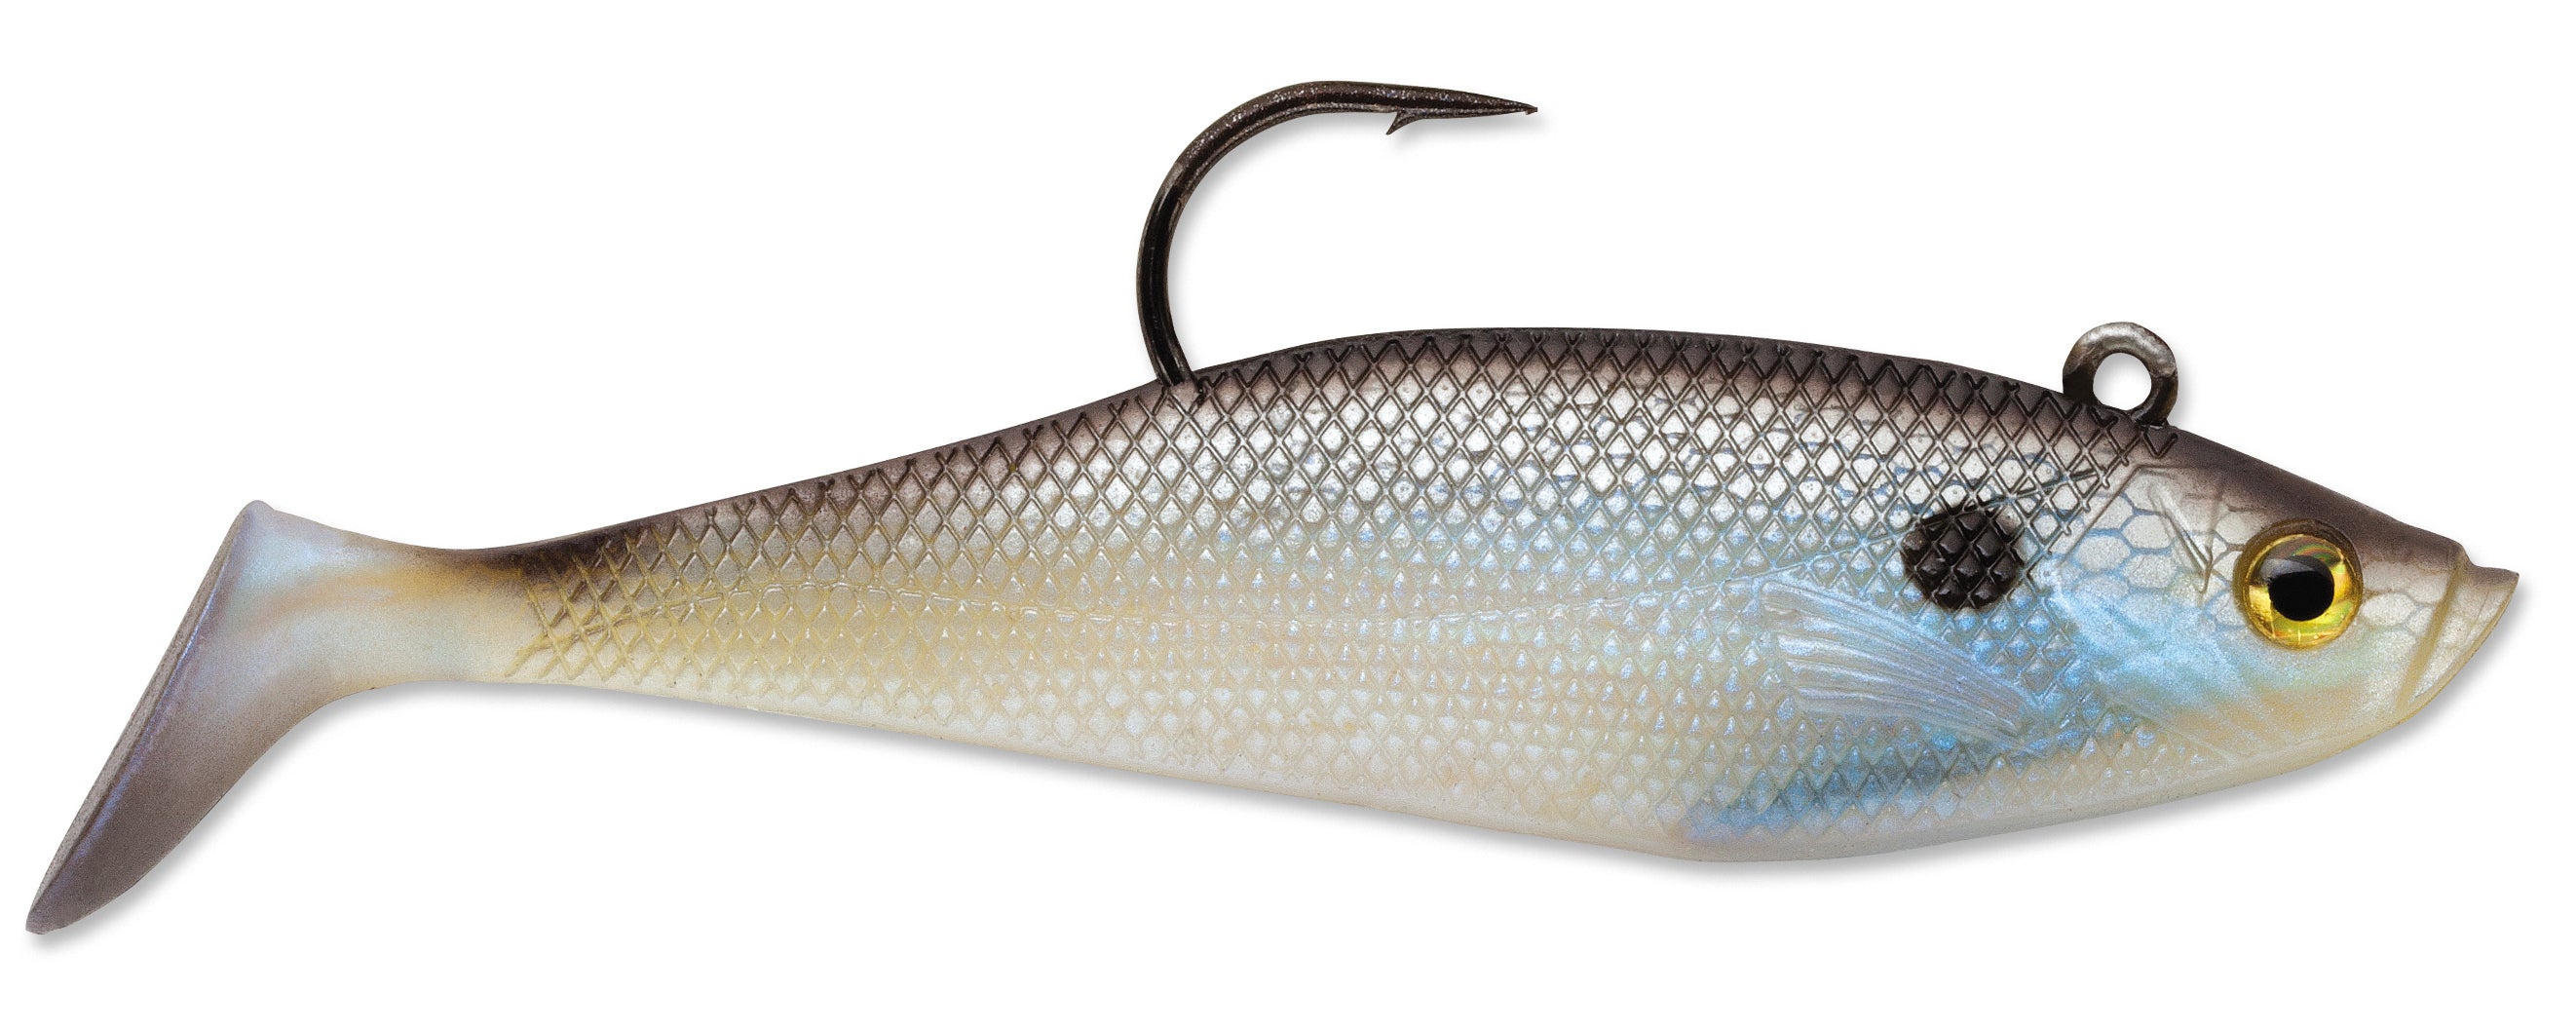 Storm Propaddletail or Curlytail Swimbaits